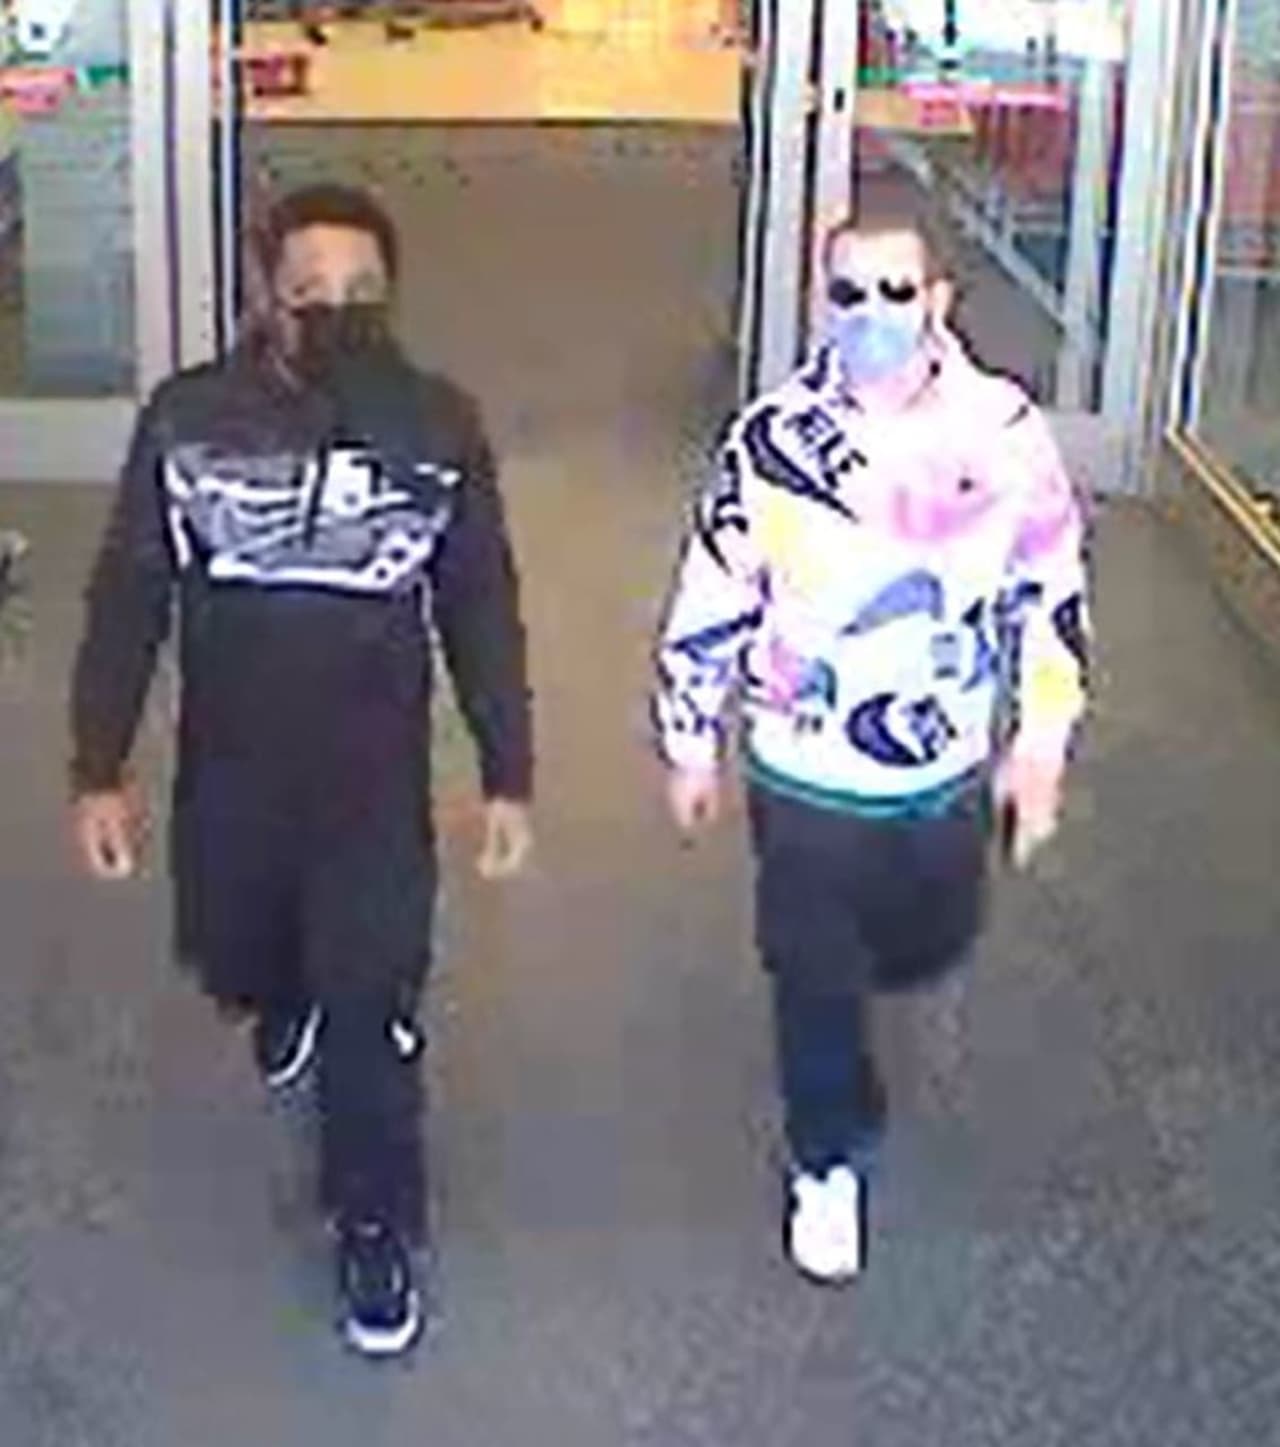 Two people are wanted after allegedly stealing from Target in Medford.